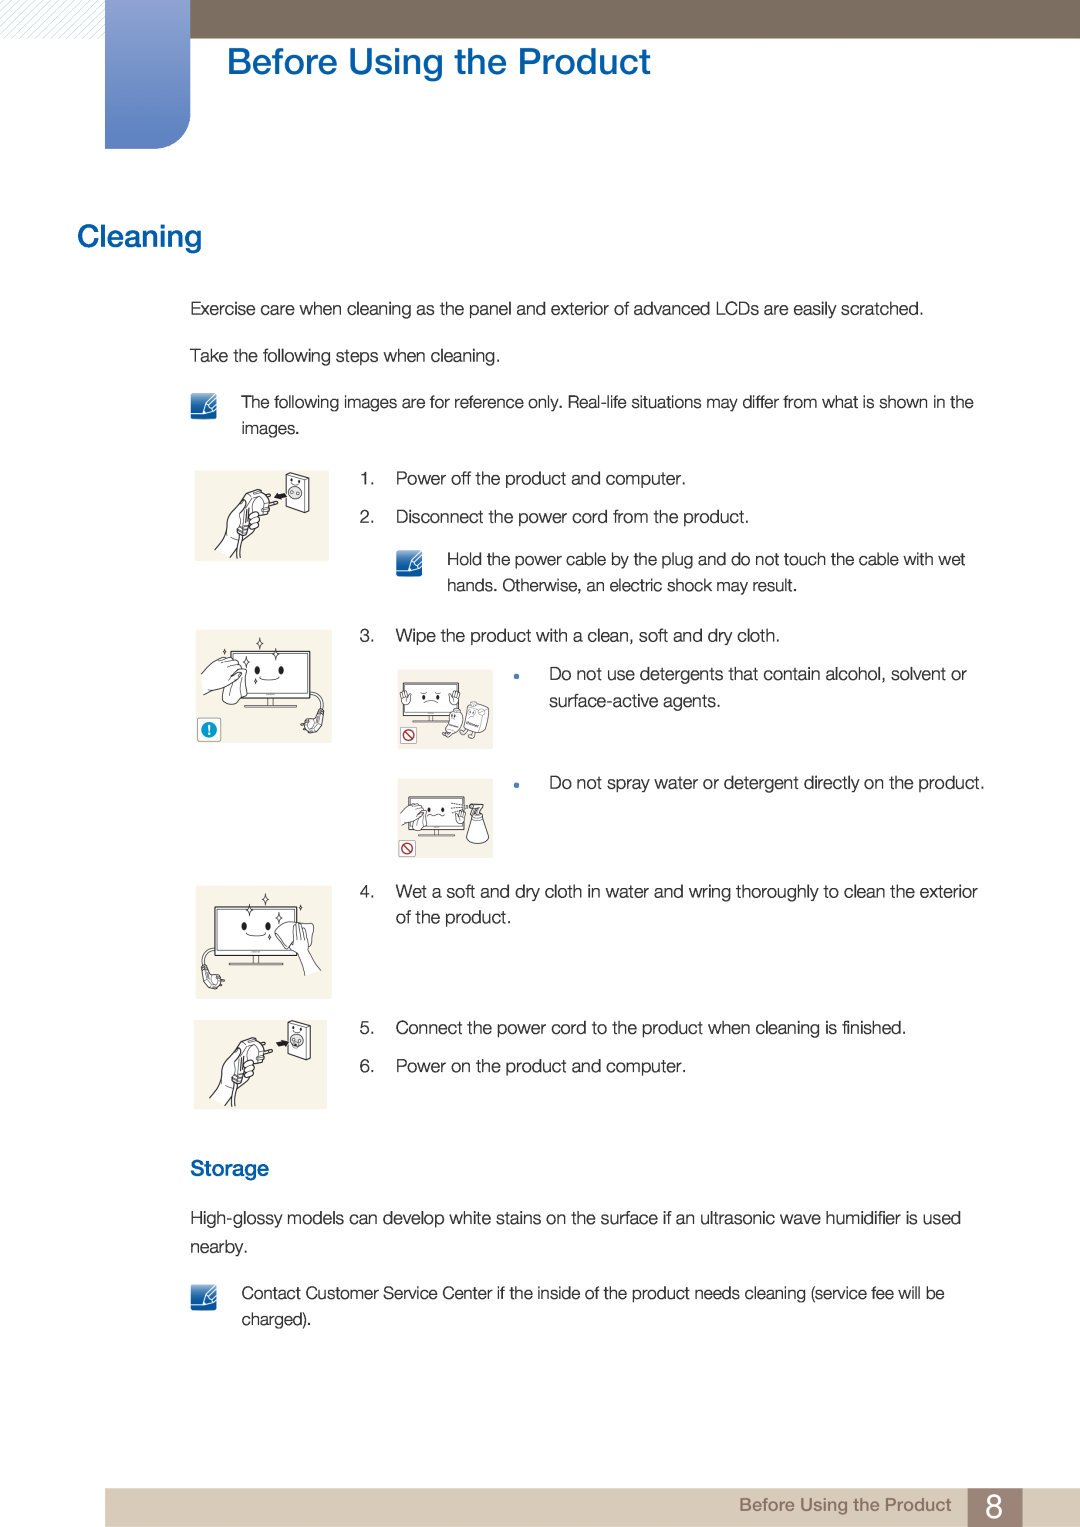 Samsung H32B, BN46-00281A-01, BN4600281A-01, H40B, H46B, 32IN user manual Cleaning, Storage, Before Using the Product 